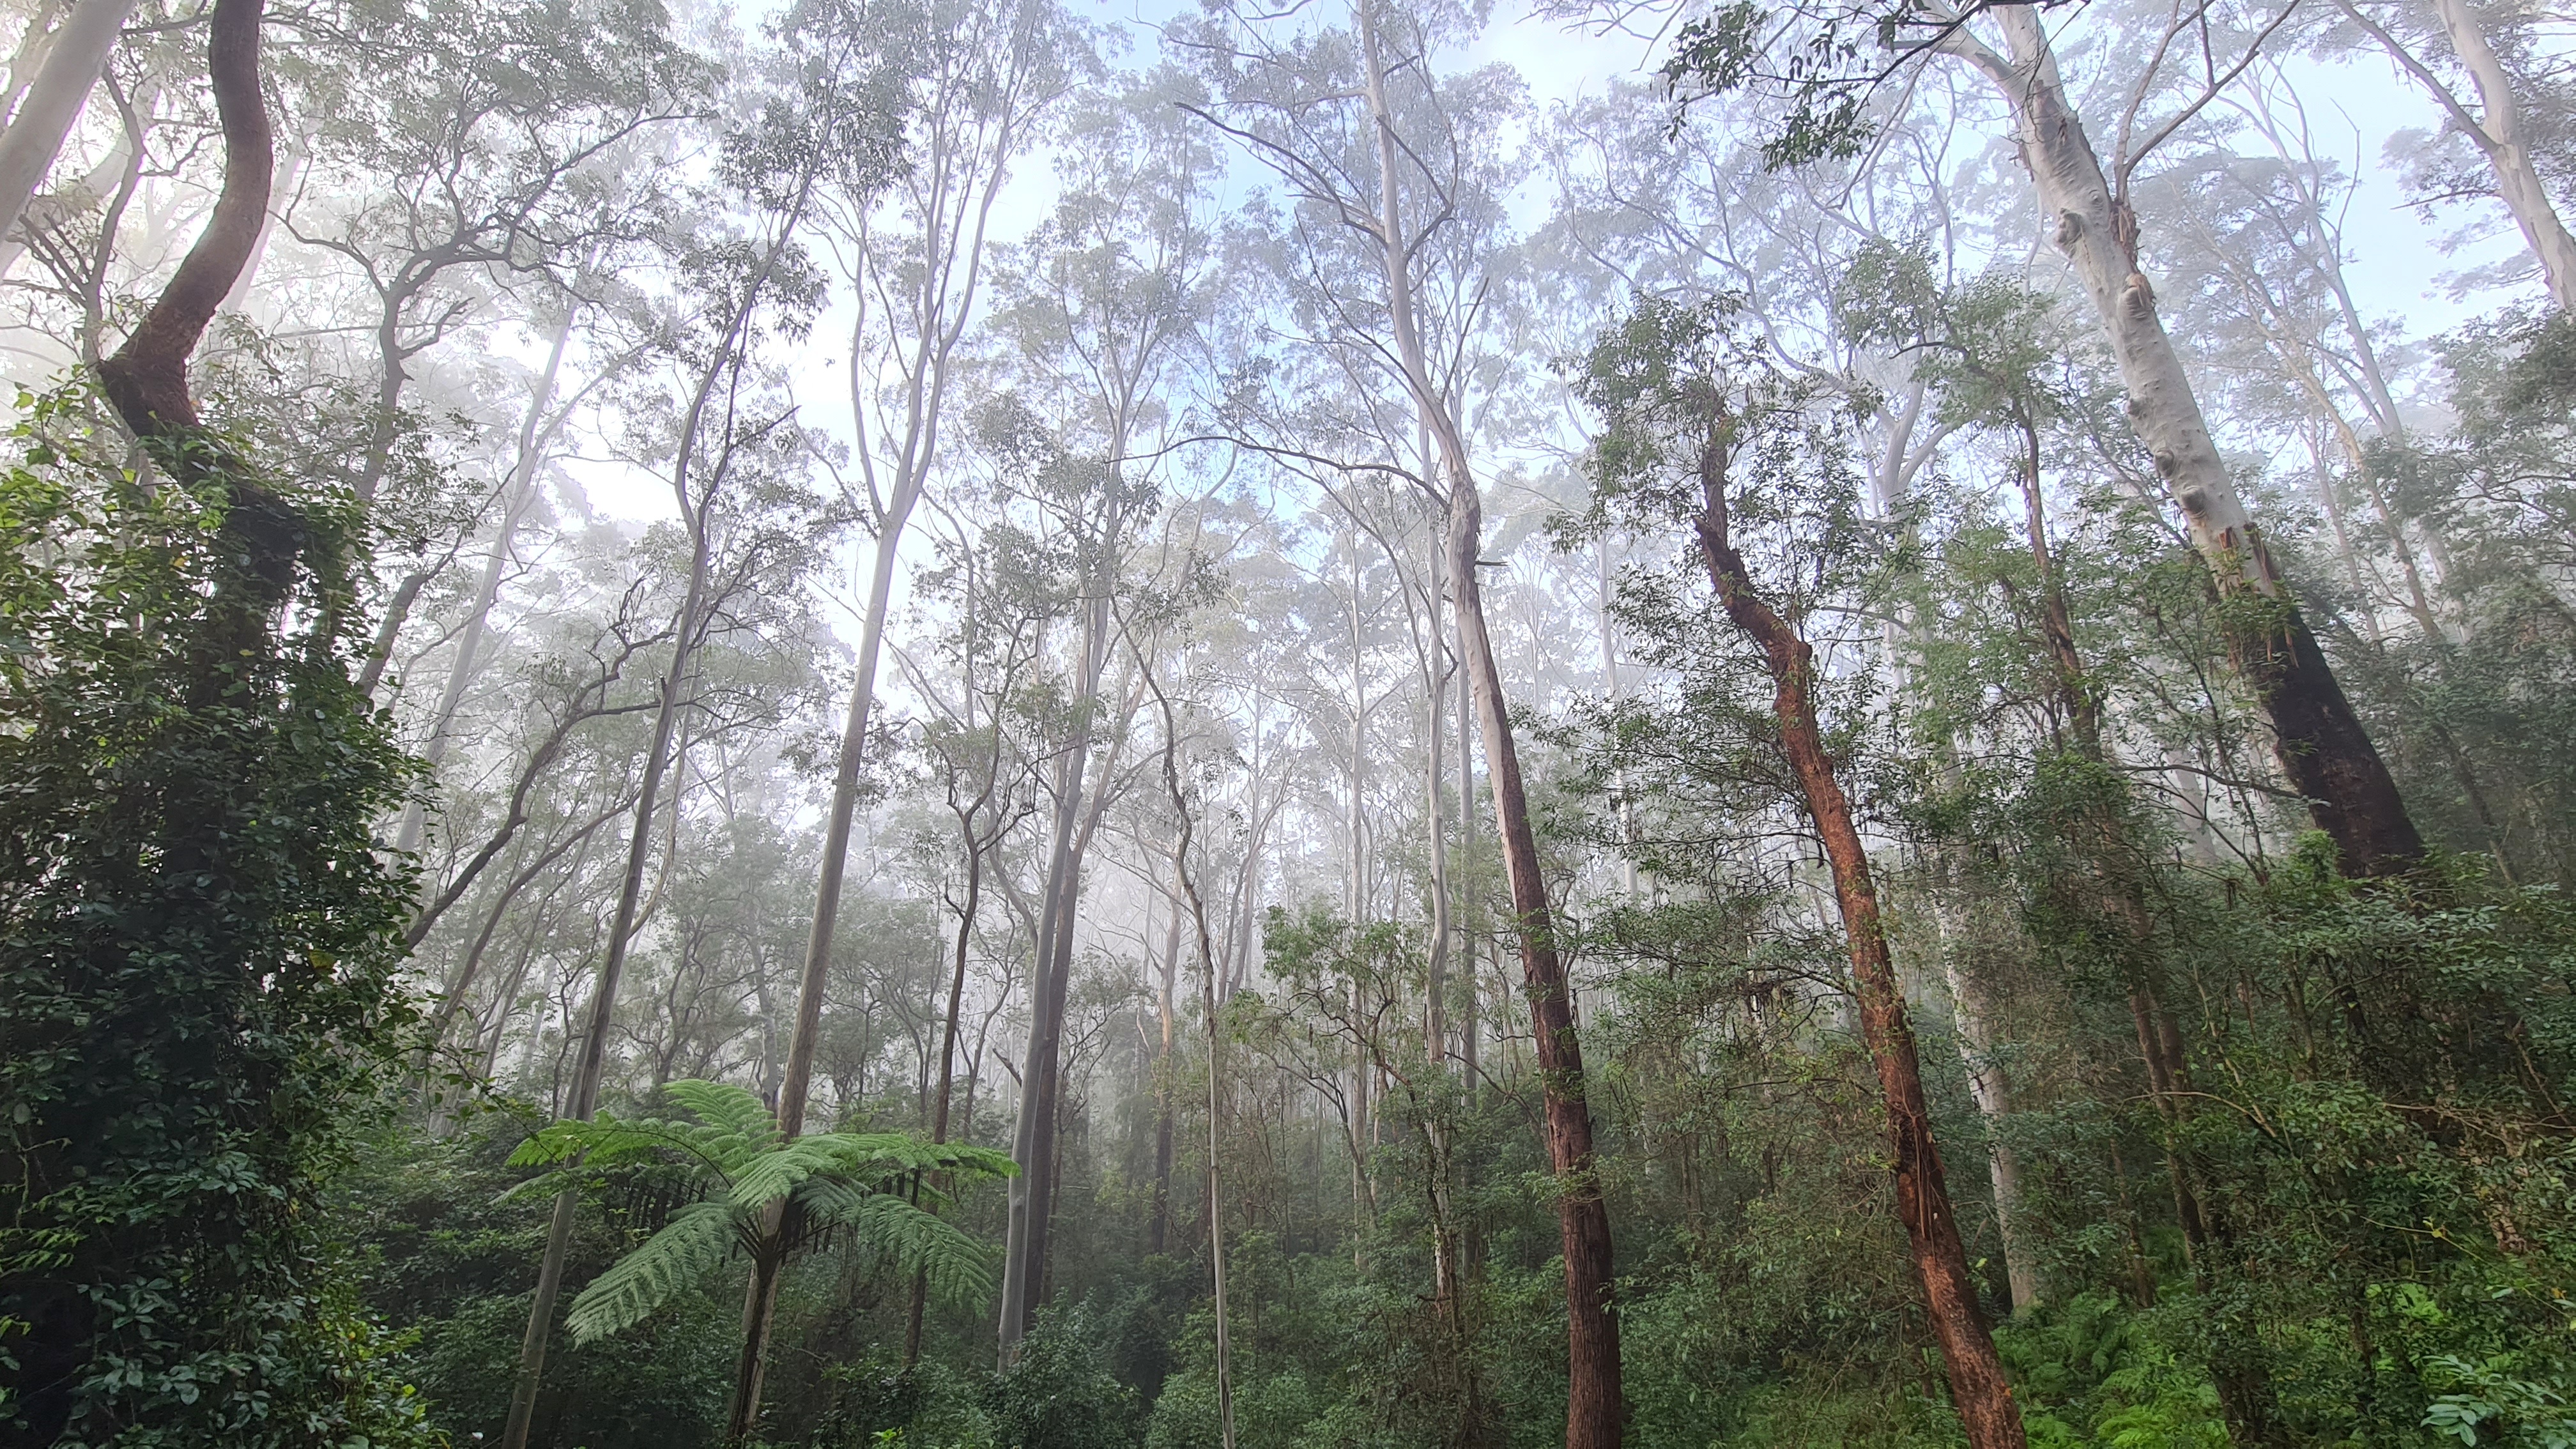 Misty morning looking up into canopy of a eucalypt forest.